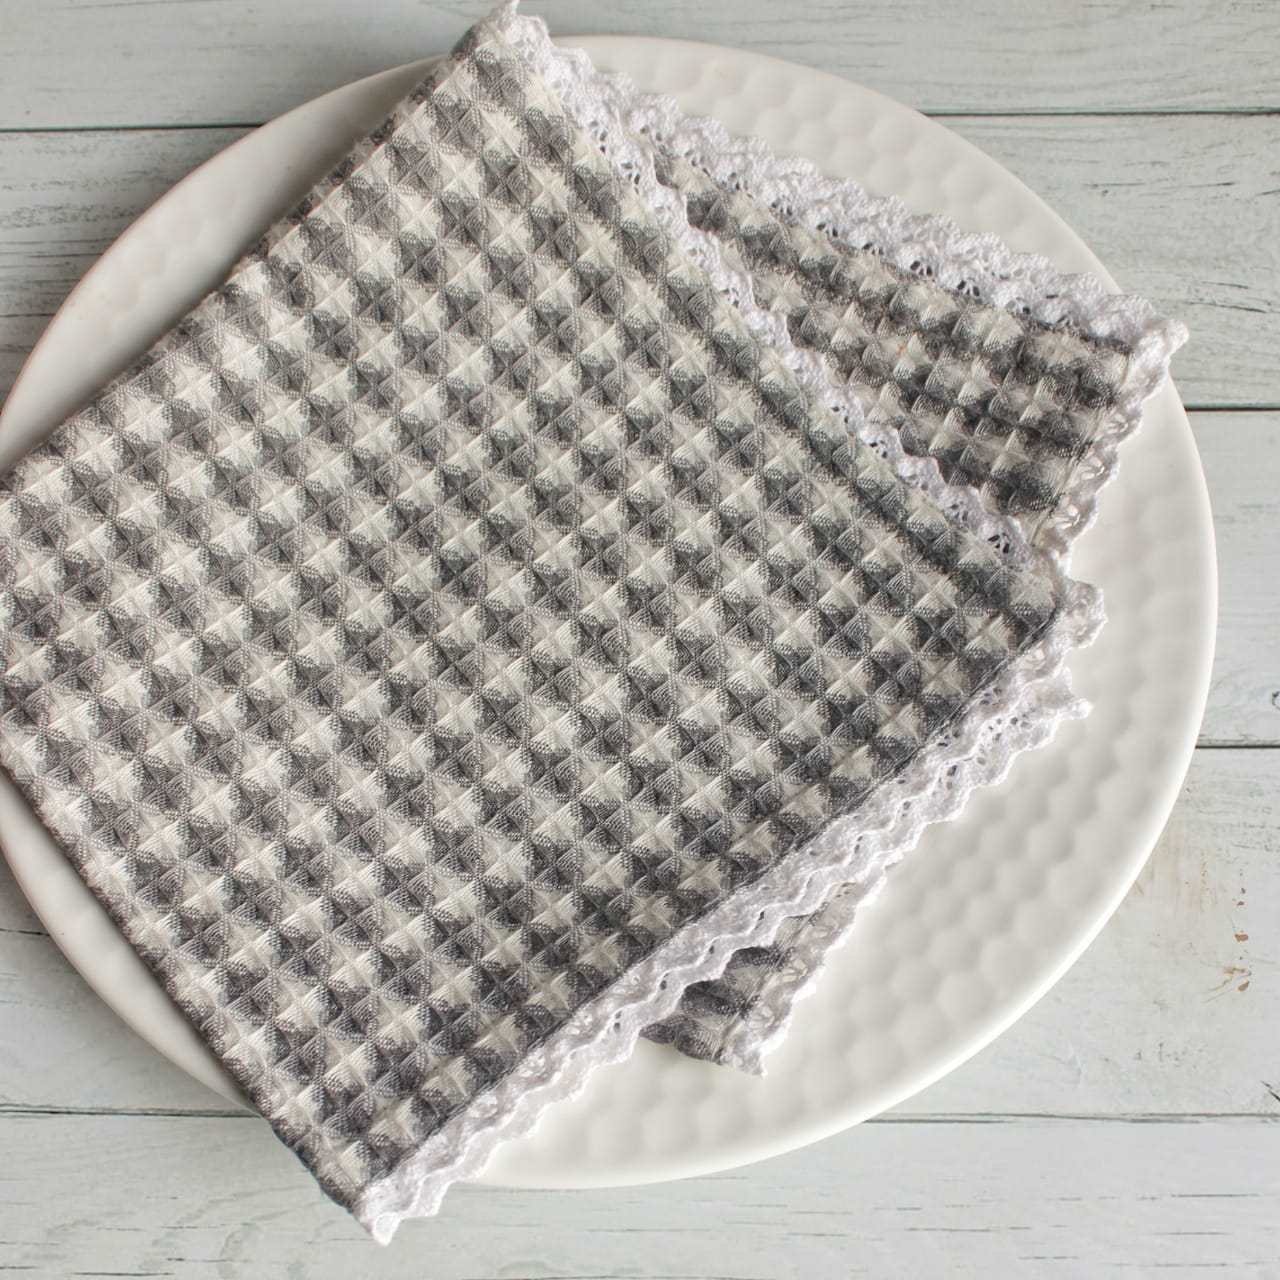 Dinner Napkins - Grey and white themed with lace edges (single unit)